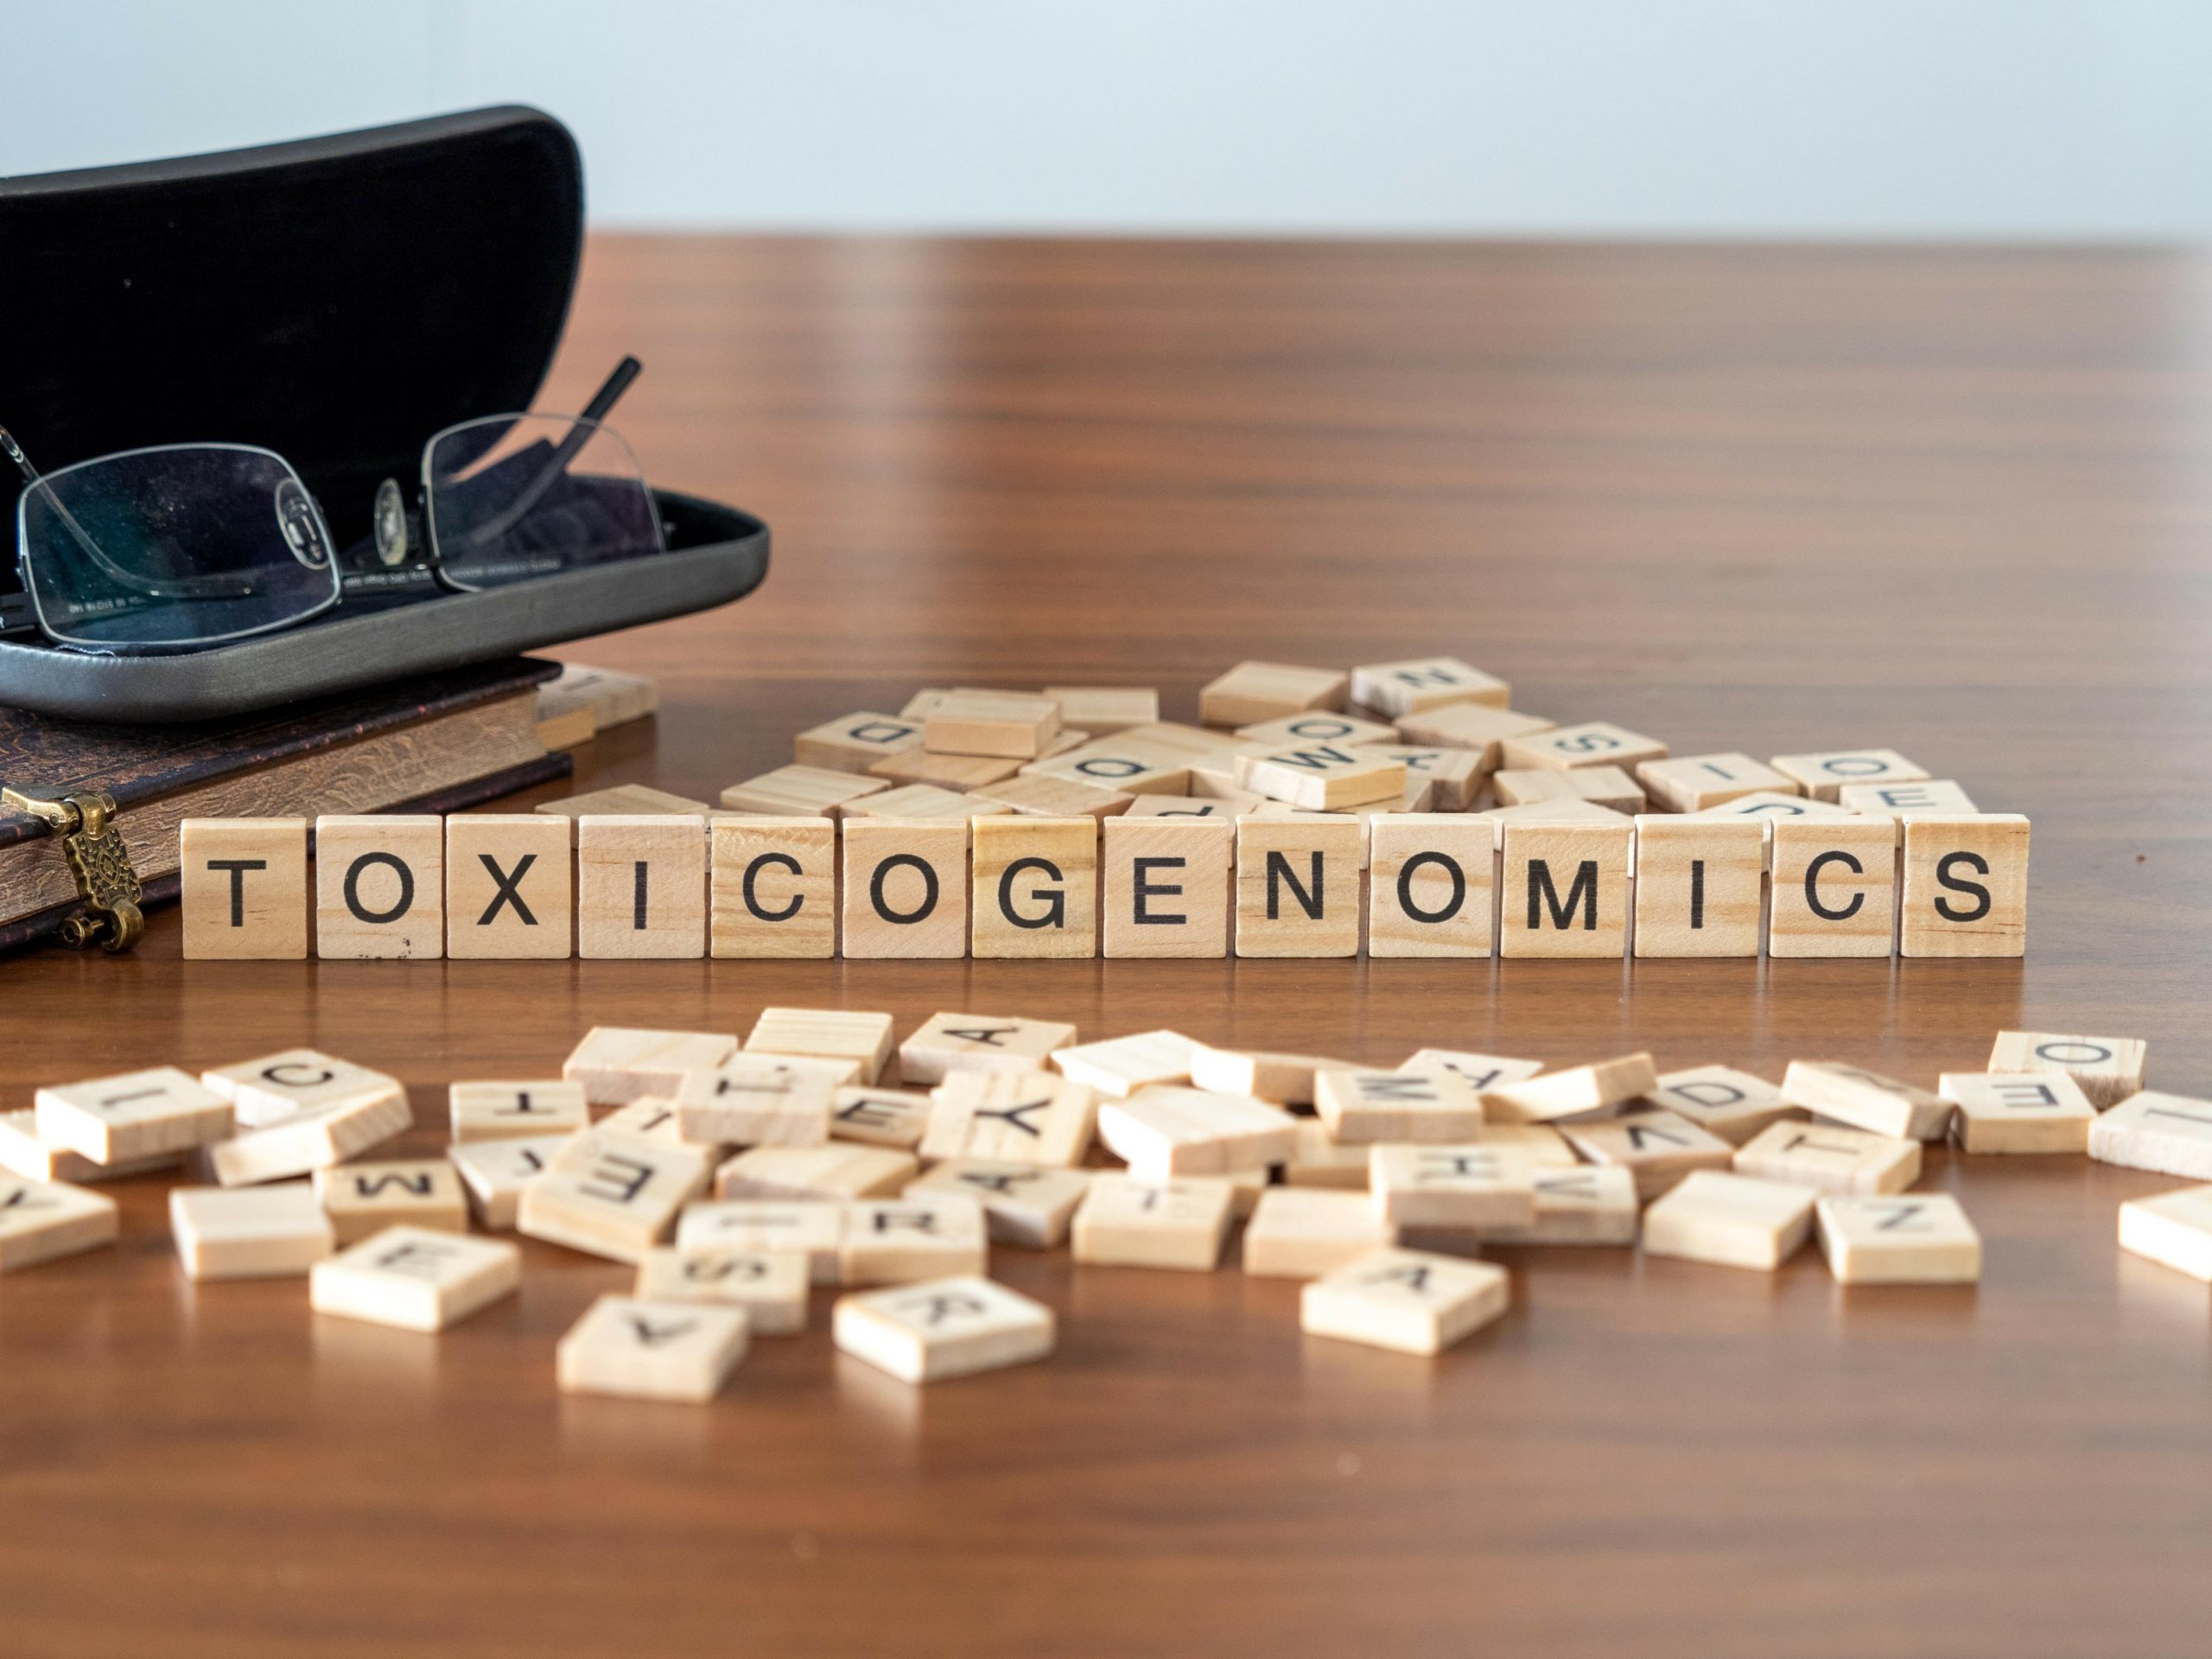 toxicogenomics concept represented by wooden letter tiles